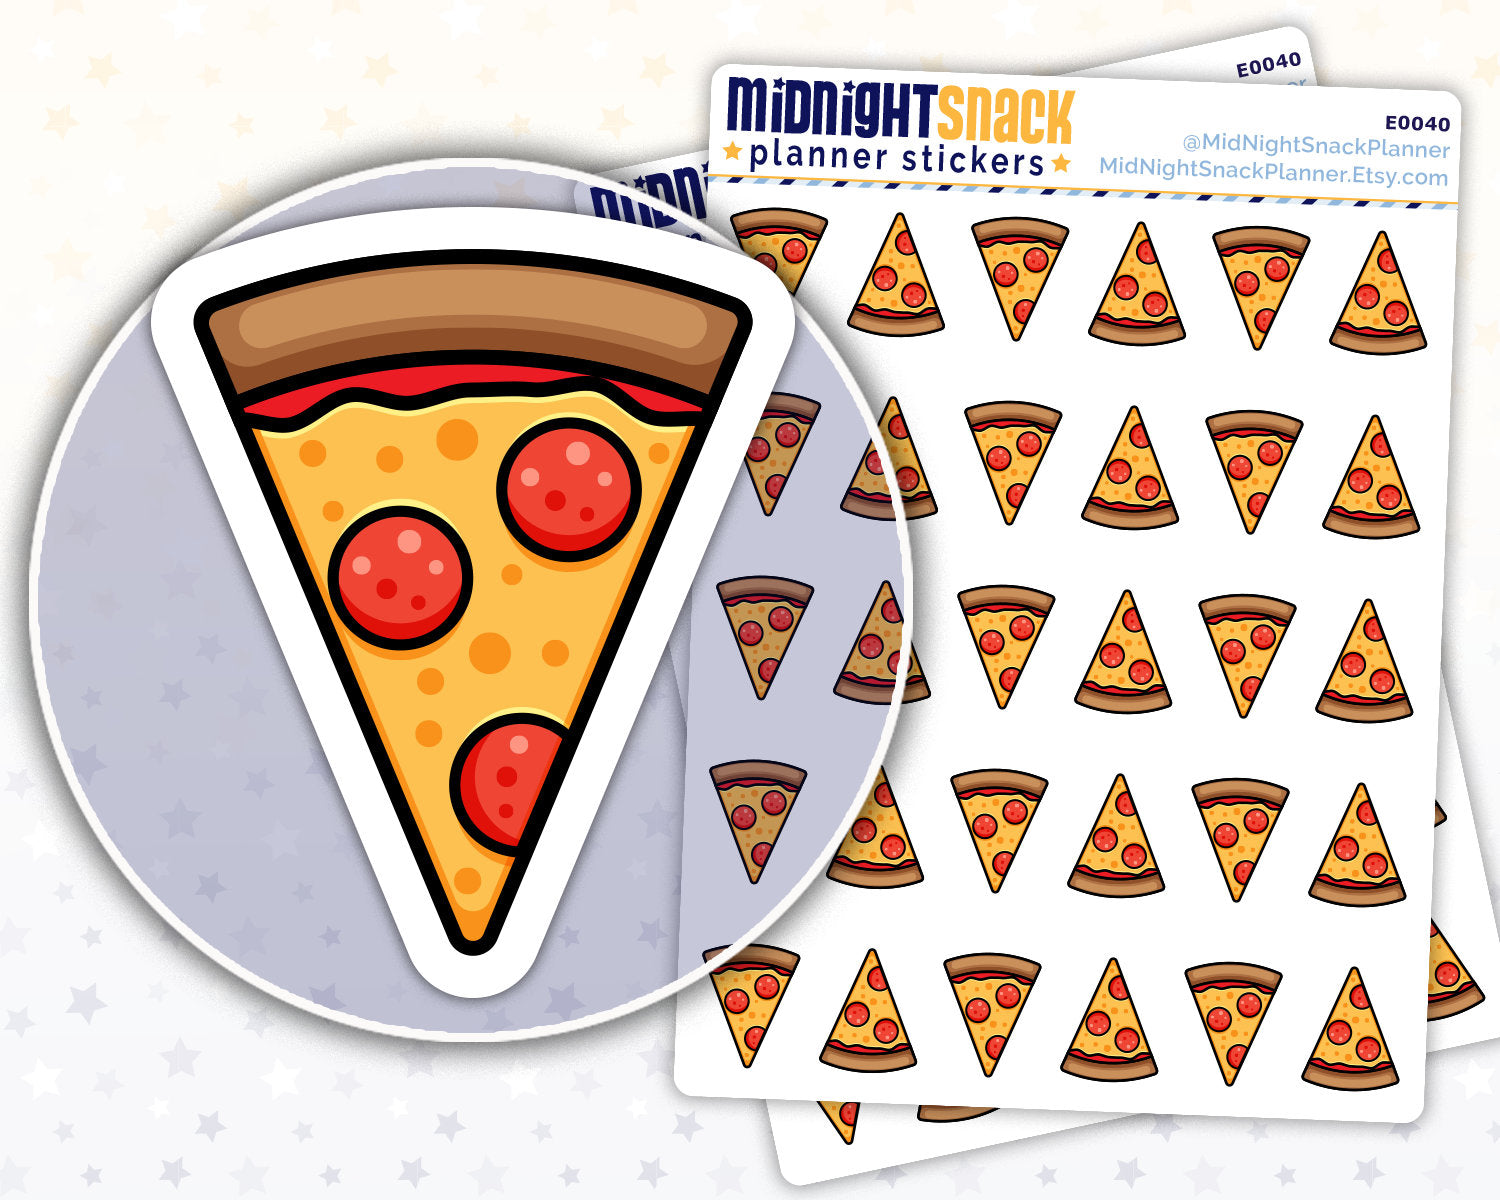 Order Pizza Icon: Meal Planning Planner Stickers Midnight Snack Planner